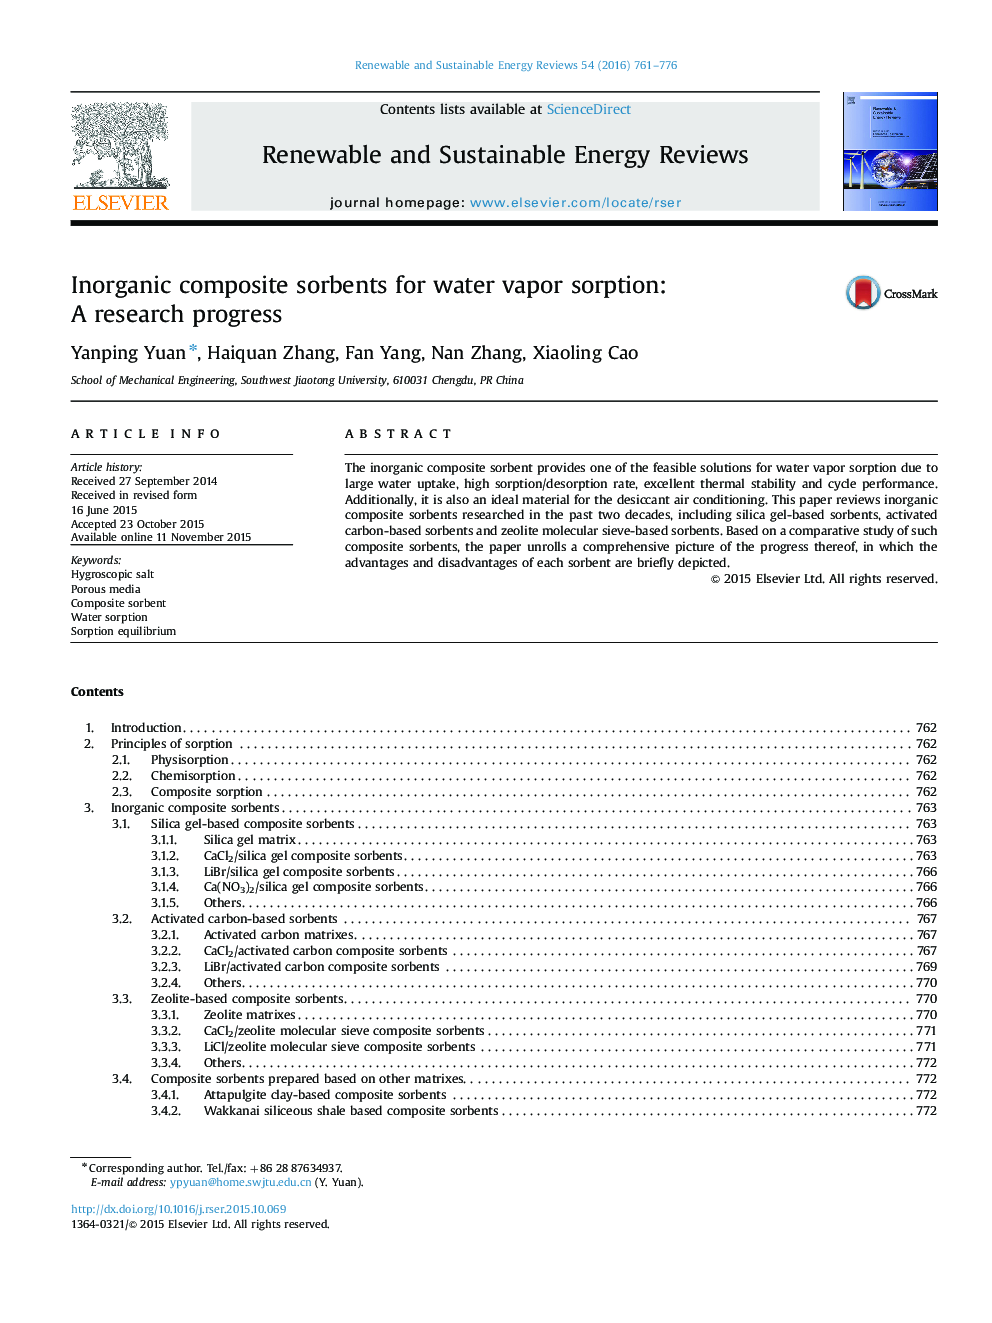 Inorganic composite sorbents for water vapor sorption: A research progress